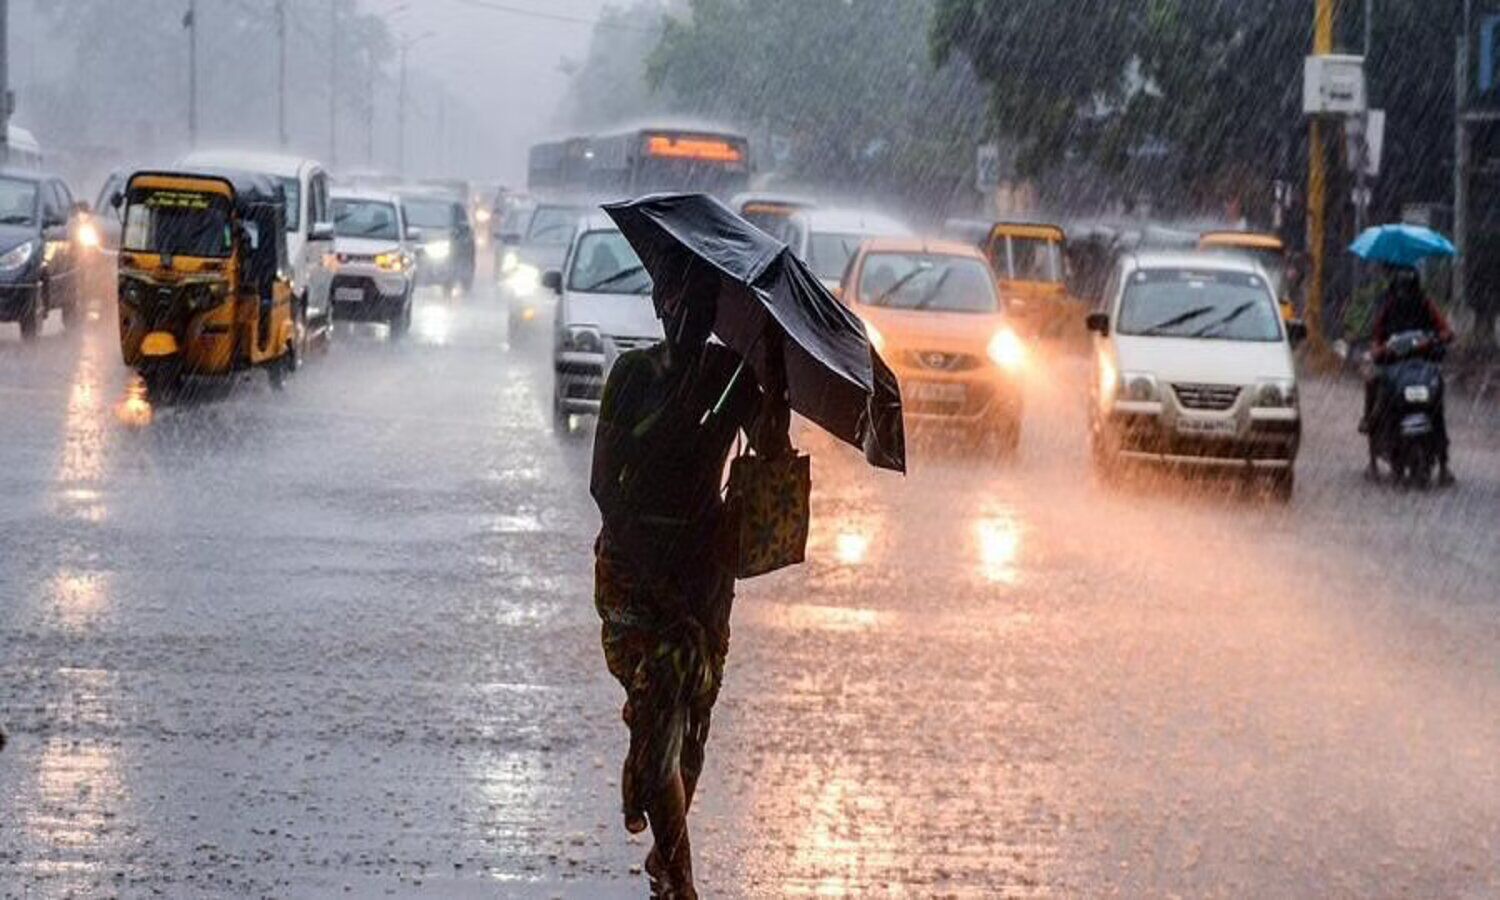 Weather Today: Weather will remain bad in Karnataka and Kerala today, heavy rains will increase people’s troubles